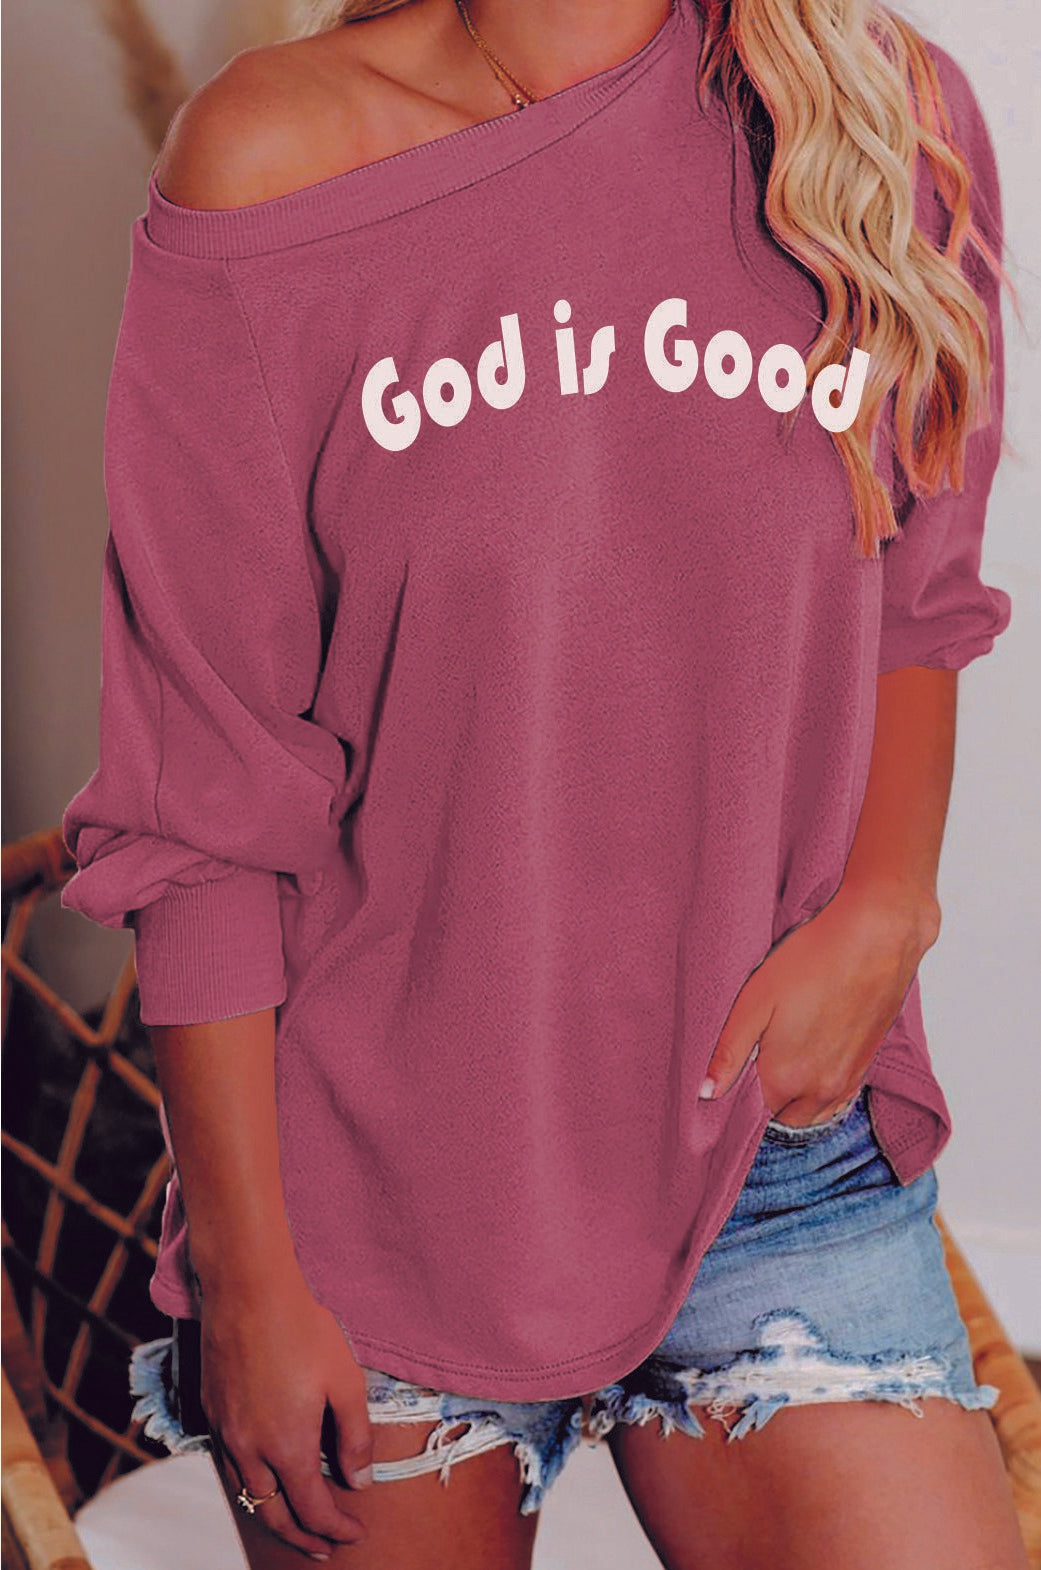 God is Good Pullover